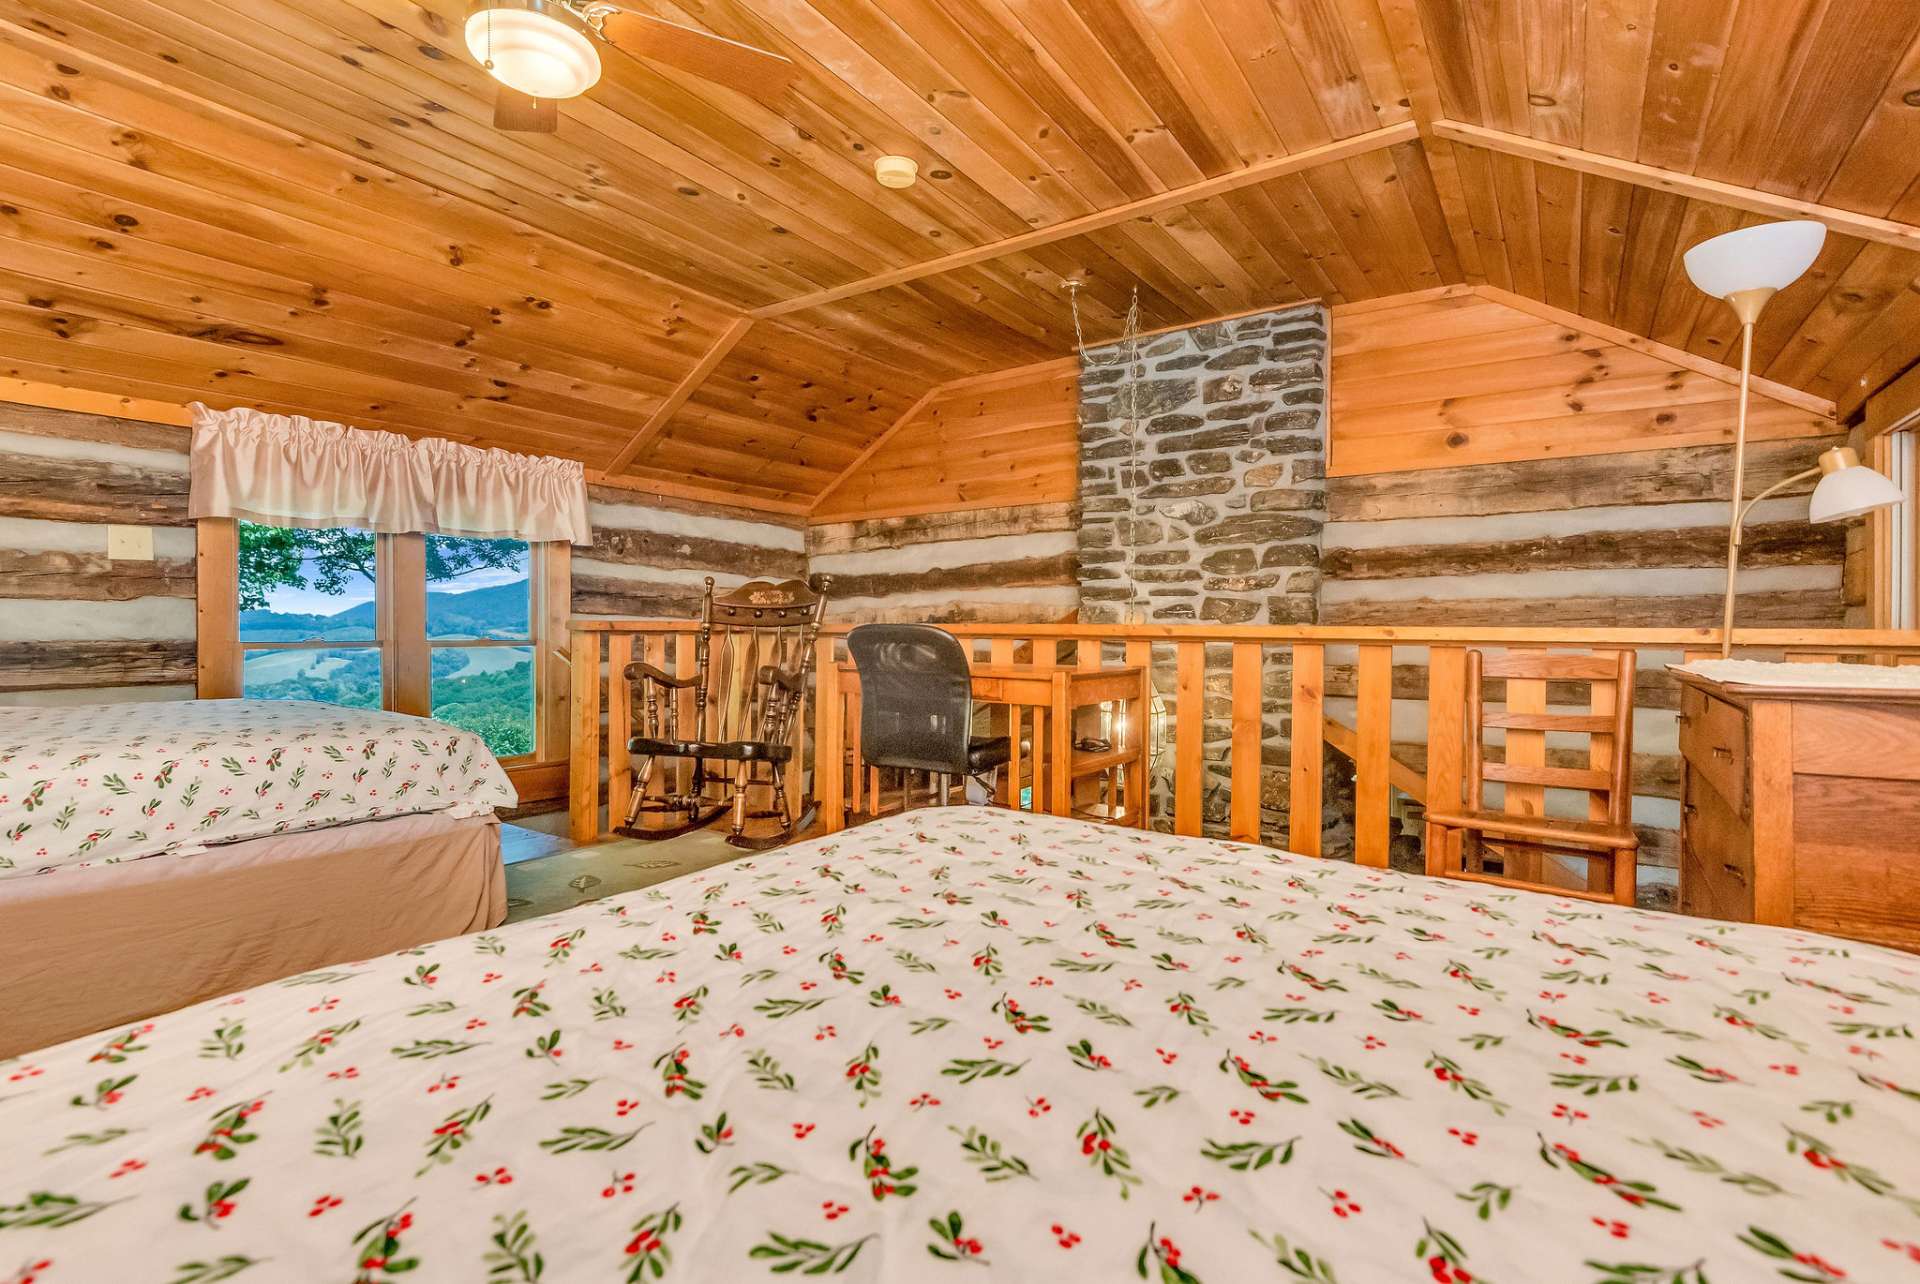 Family and friends will be delighted with tree house accommodations!